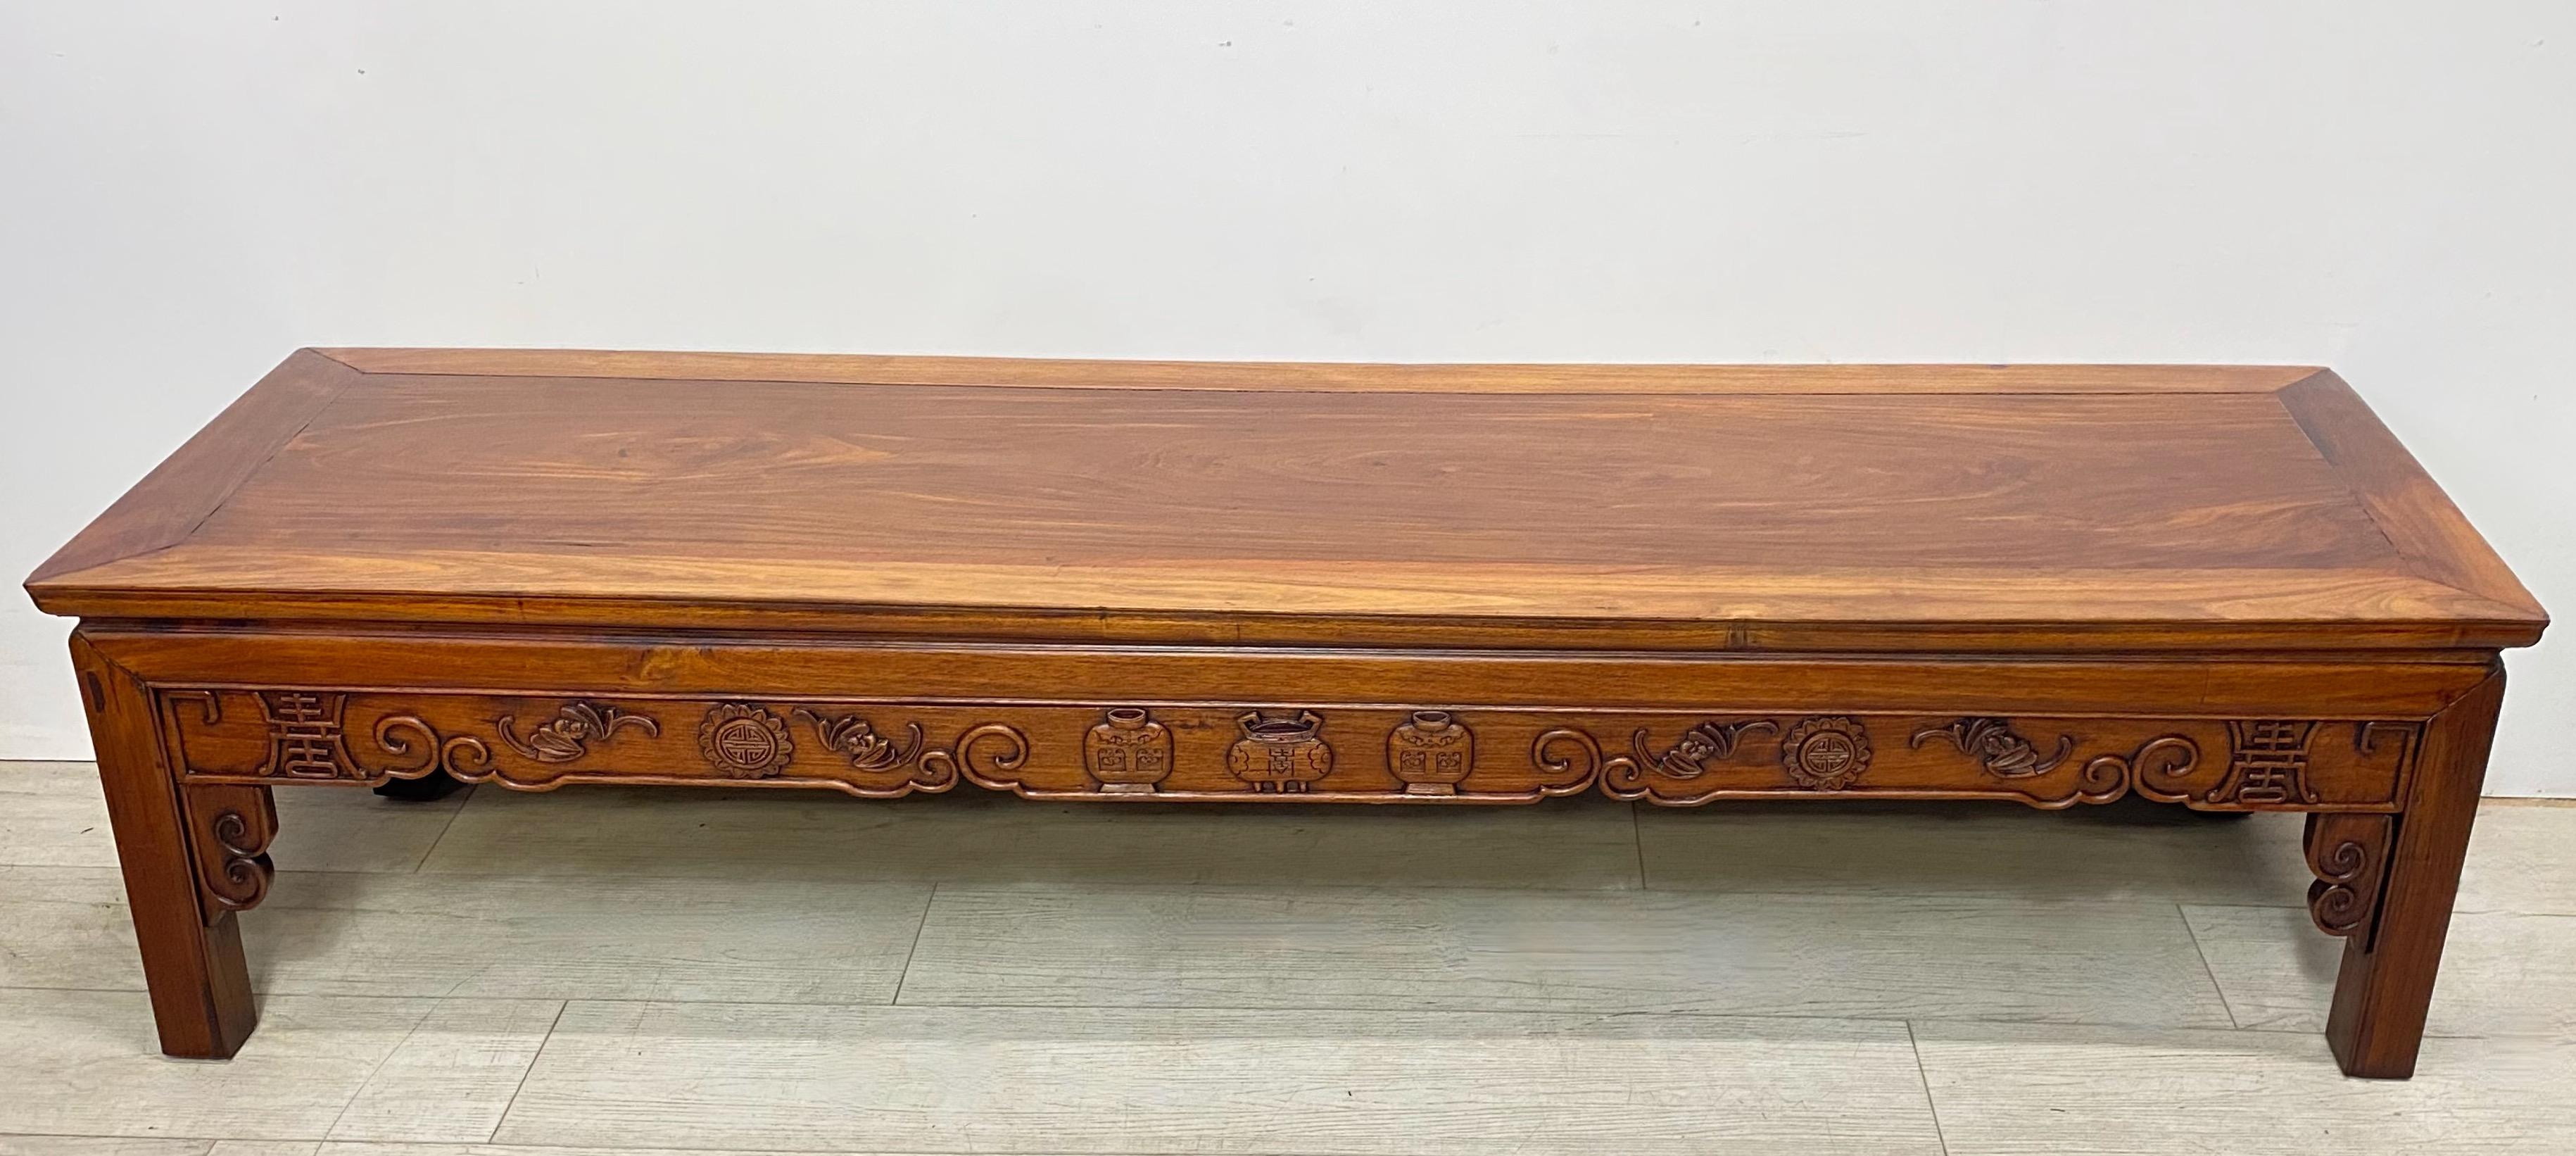 Chinese Rosewood Long Low Table or Bench, Late 19th to Early 20th Century 4